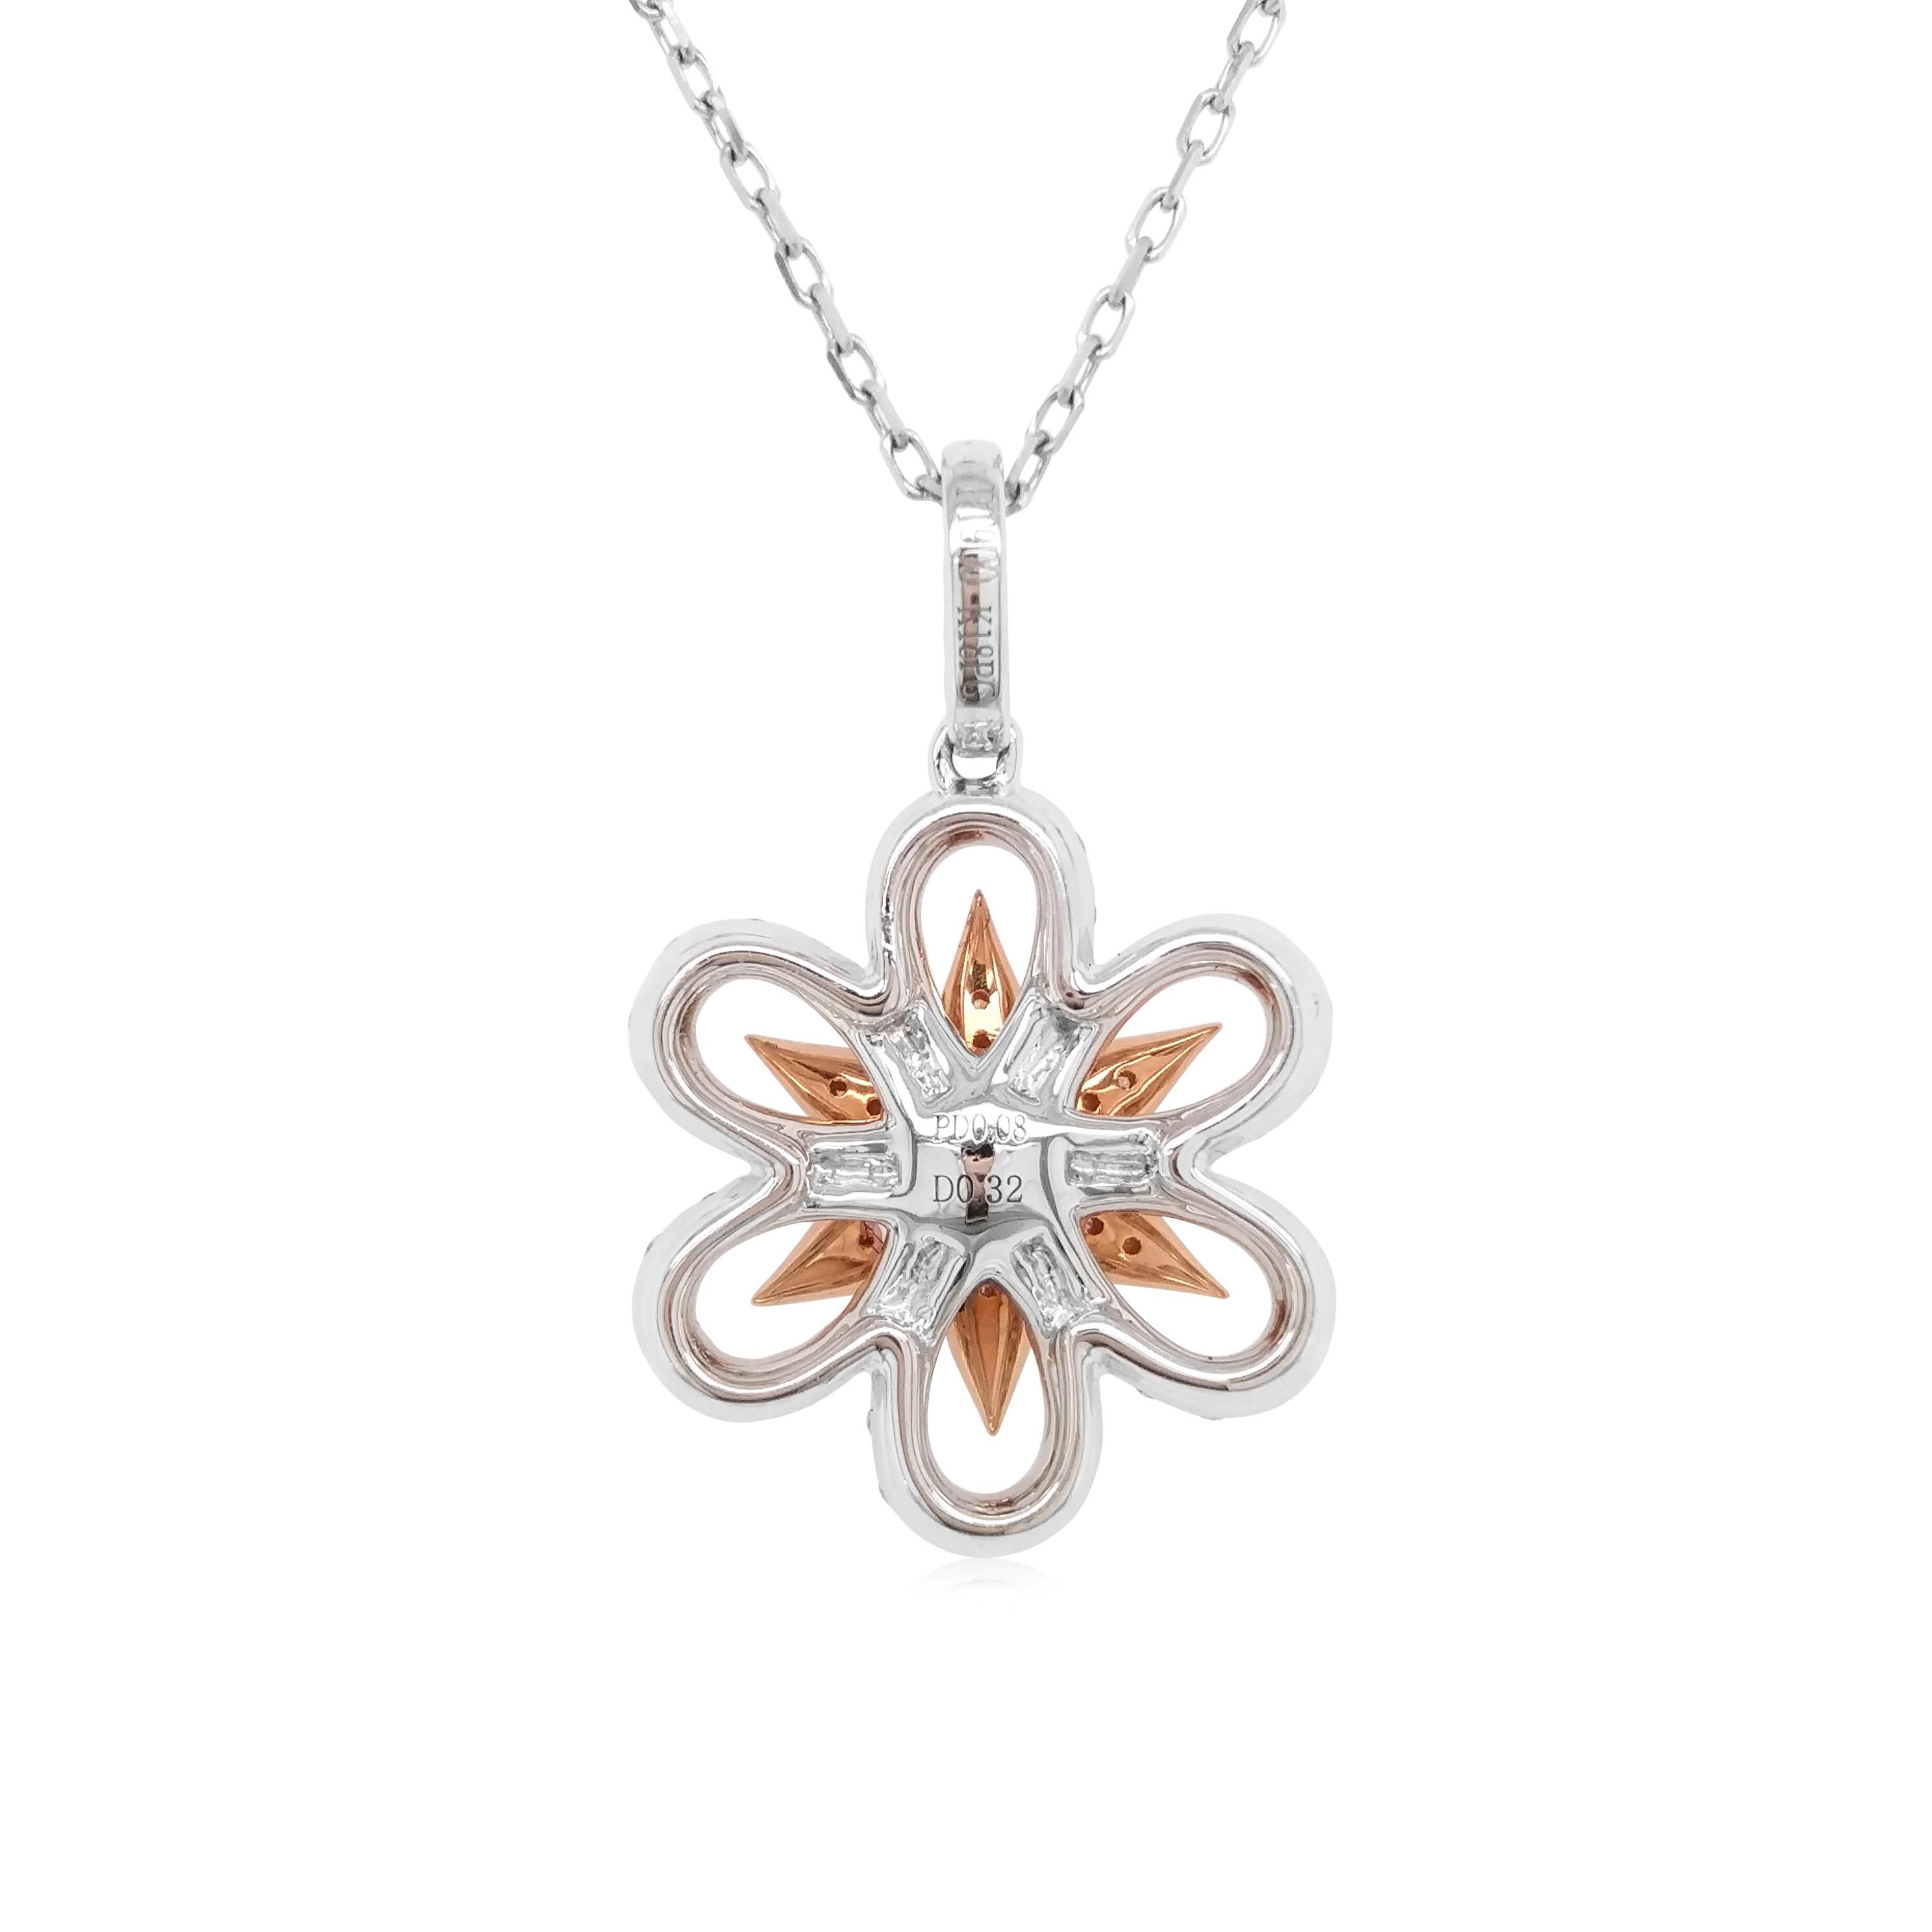 This mesmeric platinum pendant features natural Argyle pink diamonds at its forefront, accentuated by the white diamonds floral motif which surrounds it. Bold, yet intricate, this one-of-a-kind pendant will add a sumptuous touch of colour to your